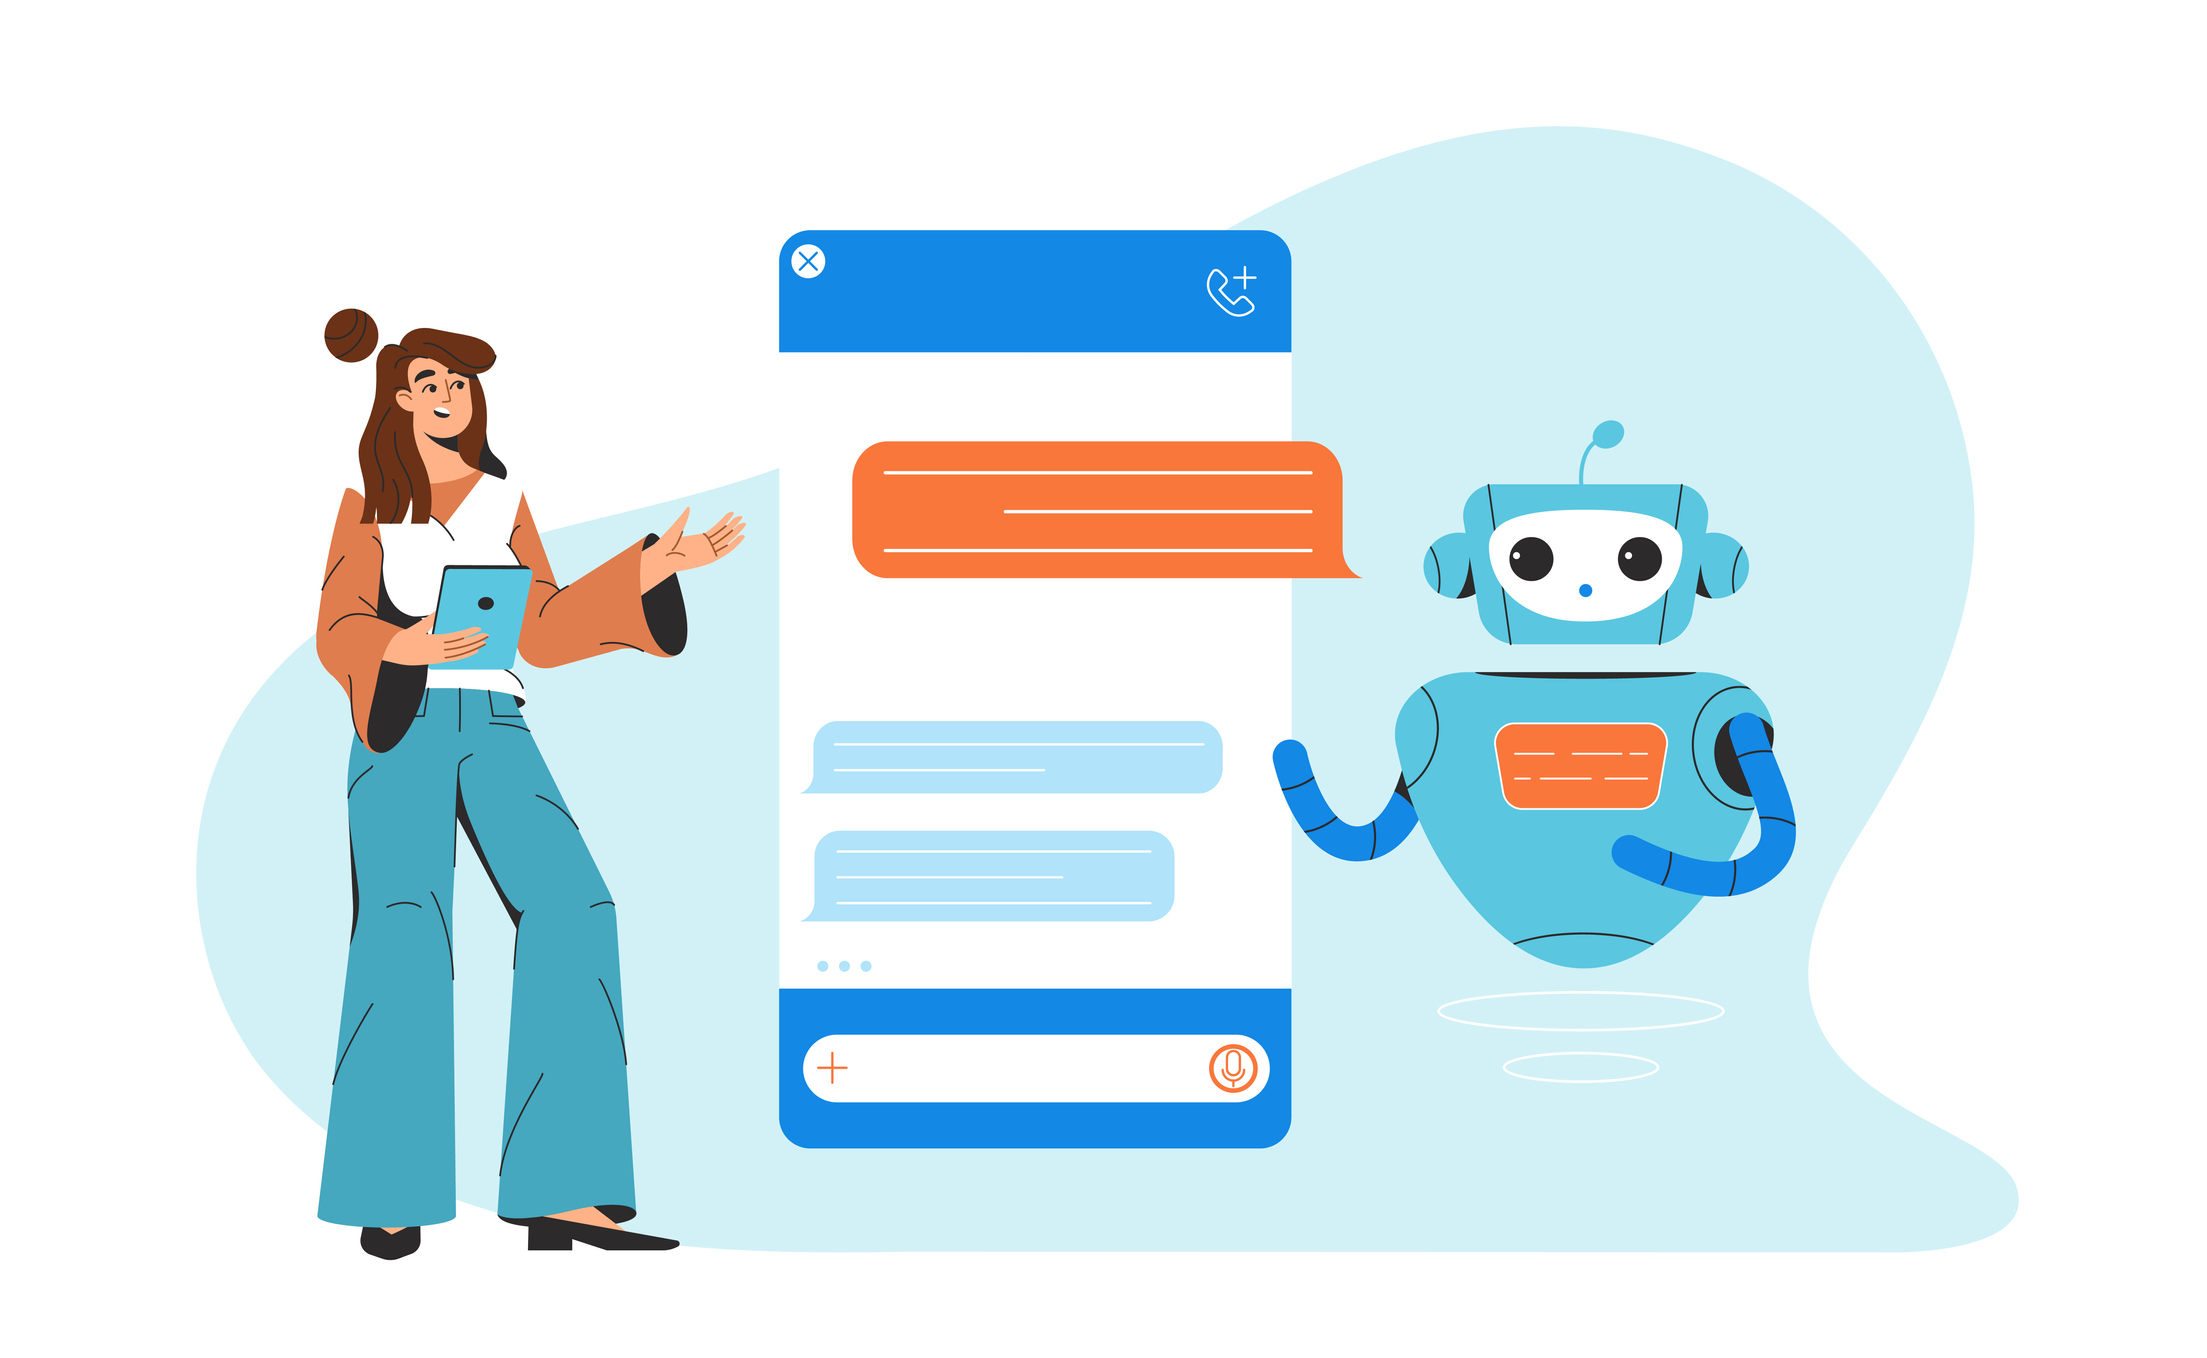 Chatbots and humans working together